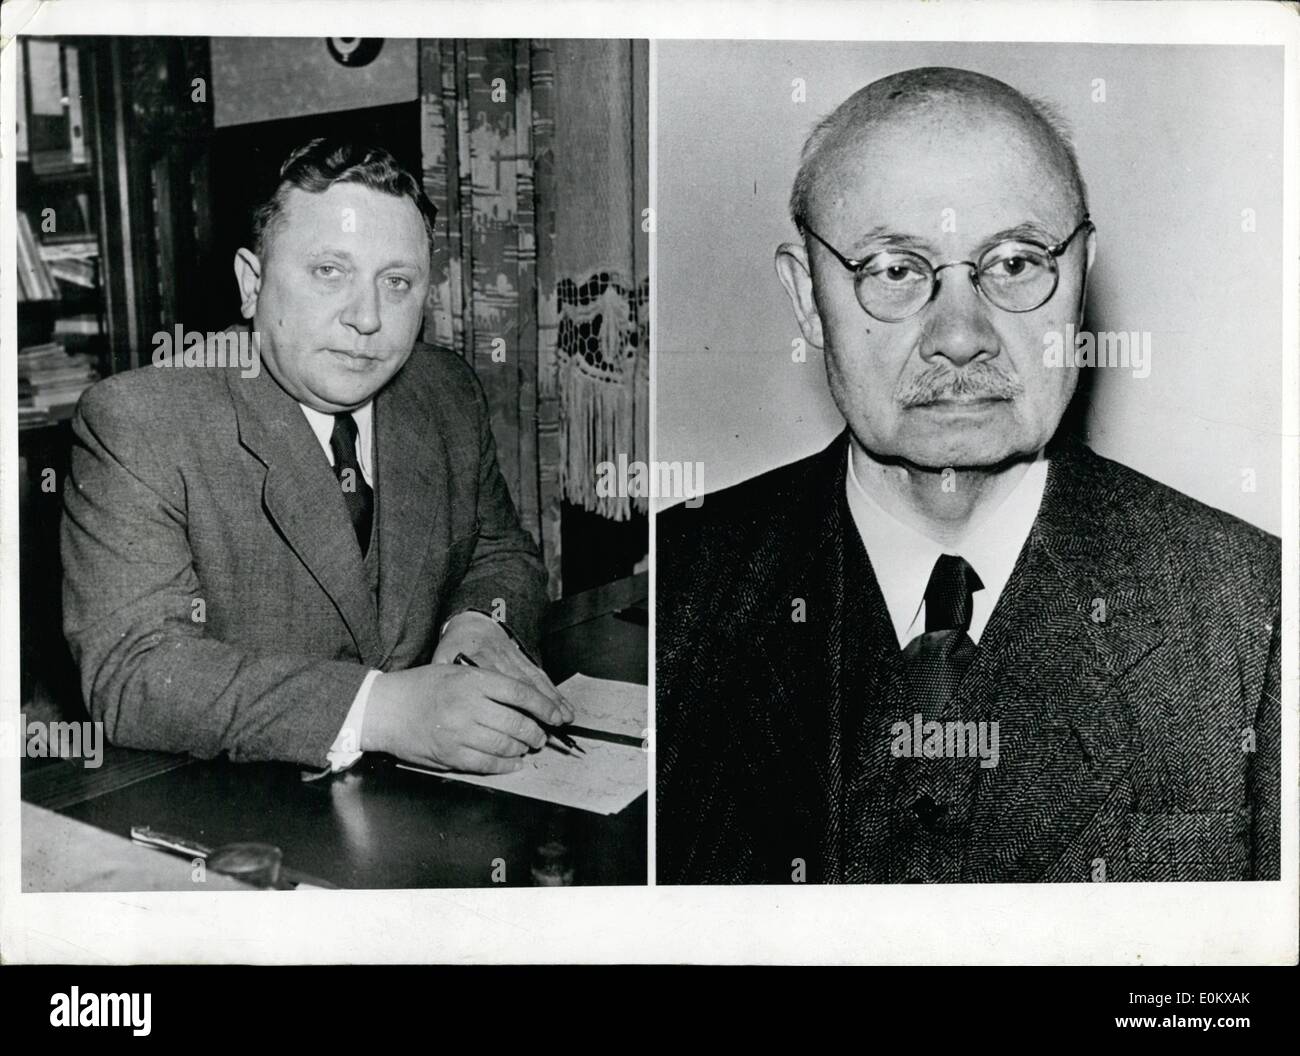 Nov. 11, 1950 - Nobel Prize for two German Scientists! The high honor of the 1950 Nobel Prize for Chemistry was awarded to two German scientists: Prof. Dr. Otto Diels, for his work in organic chemistry, and to Prof. Dr. Kurt Alder, who specialized in experimental chemist Stock Photo